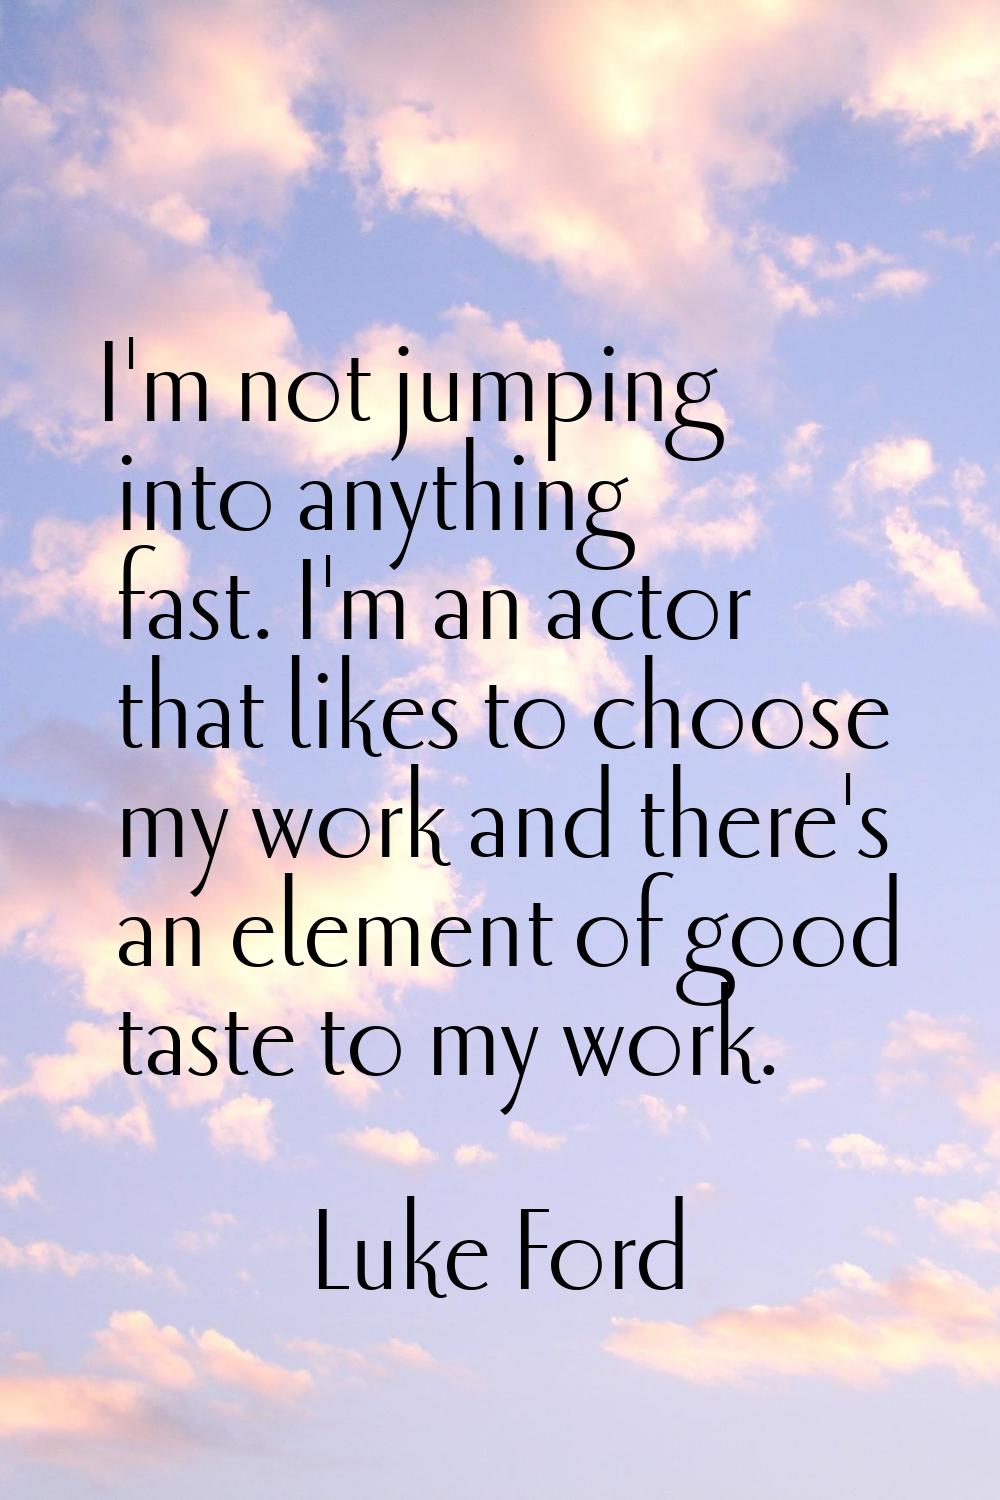 I'm not jumping into anything fast. I'm an actor that likes to choose my work and there's an elemen